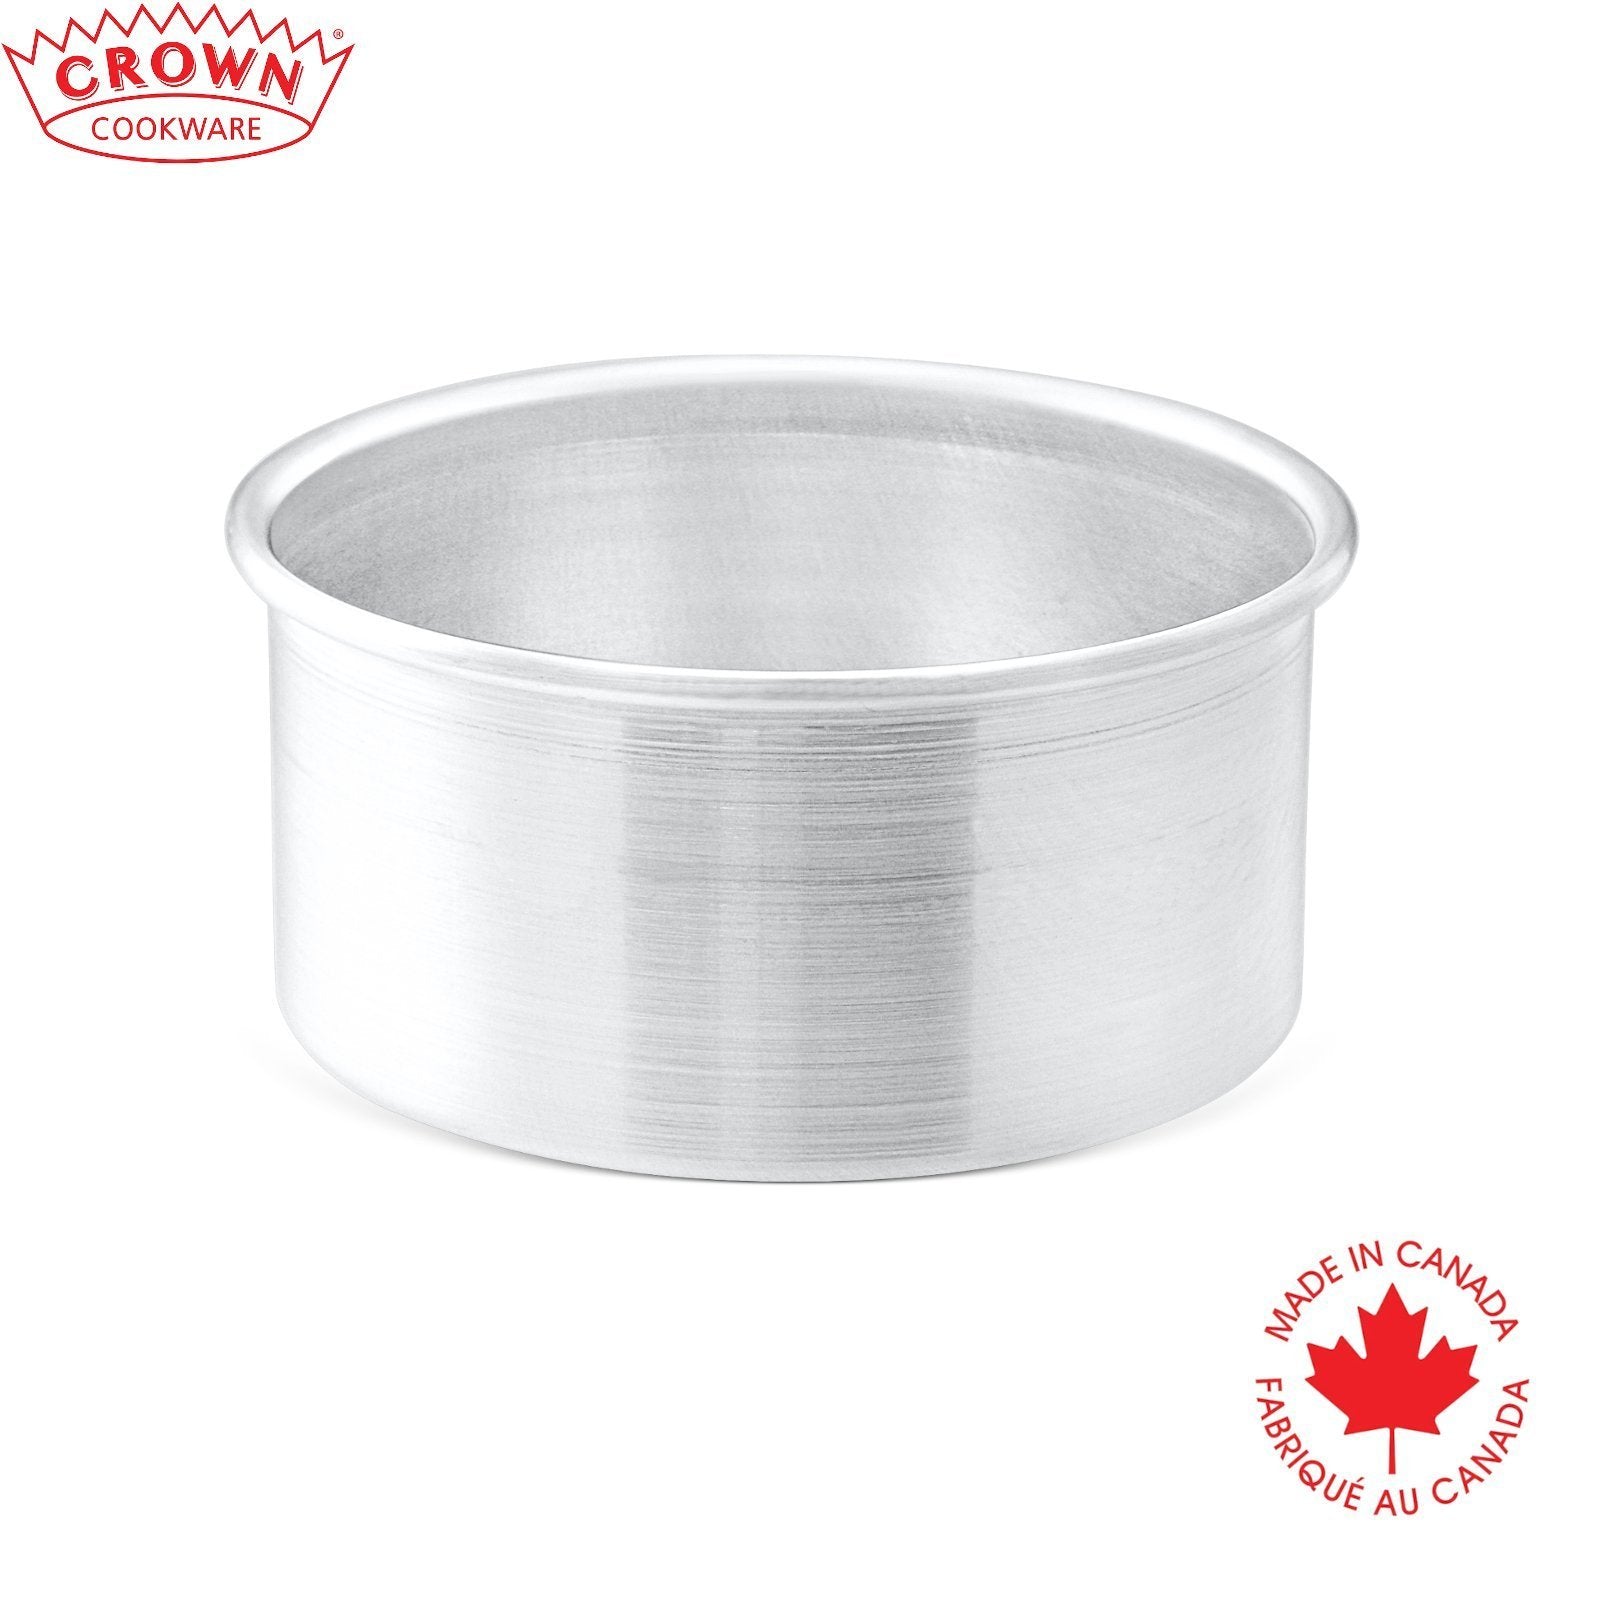 Round Cake pans, 3 inch Deep - Crown Cookware